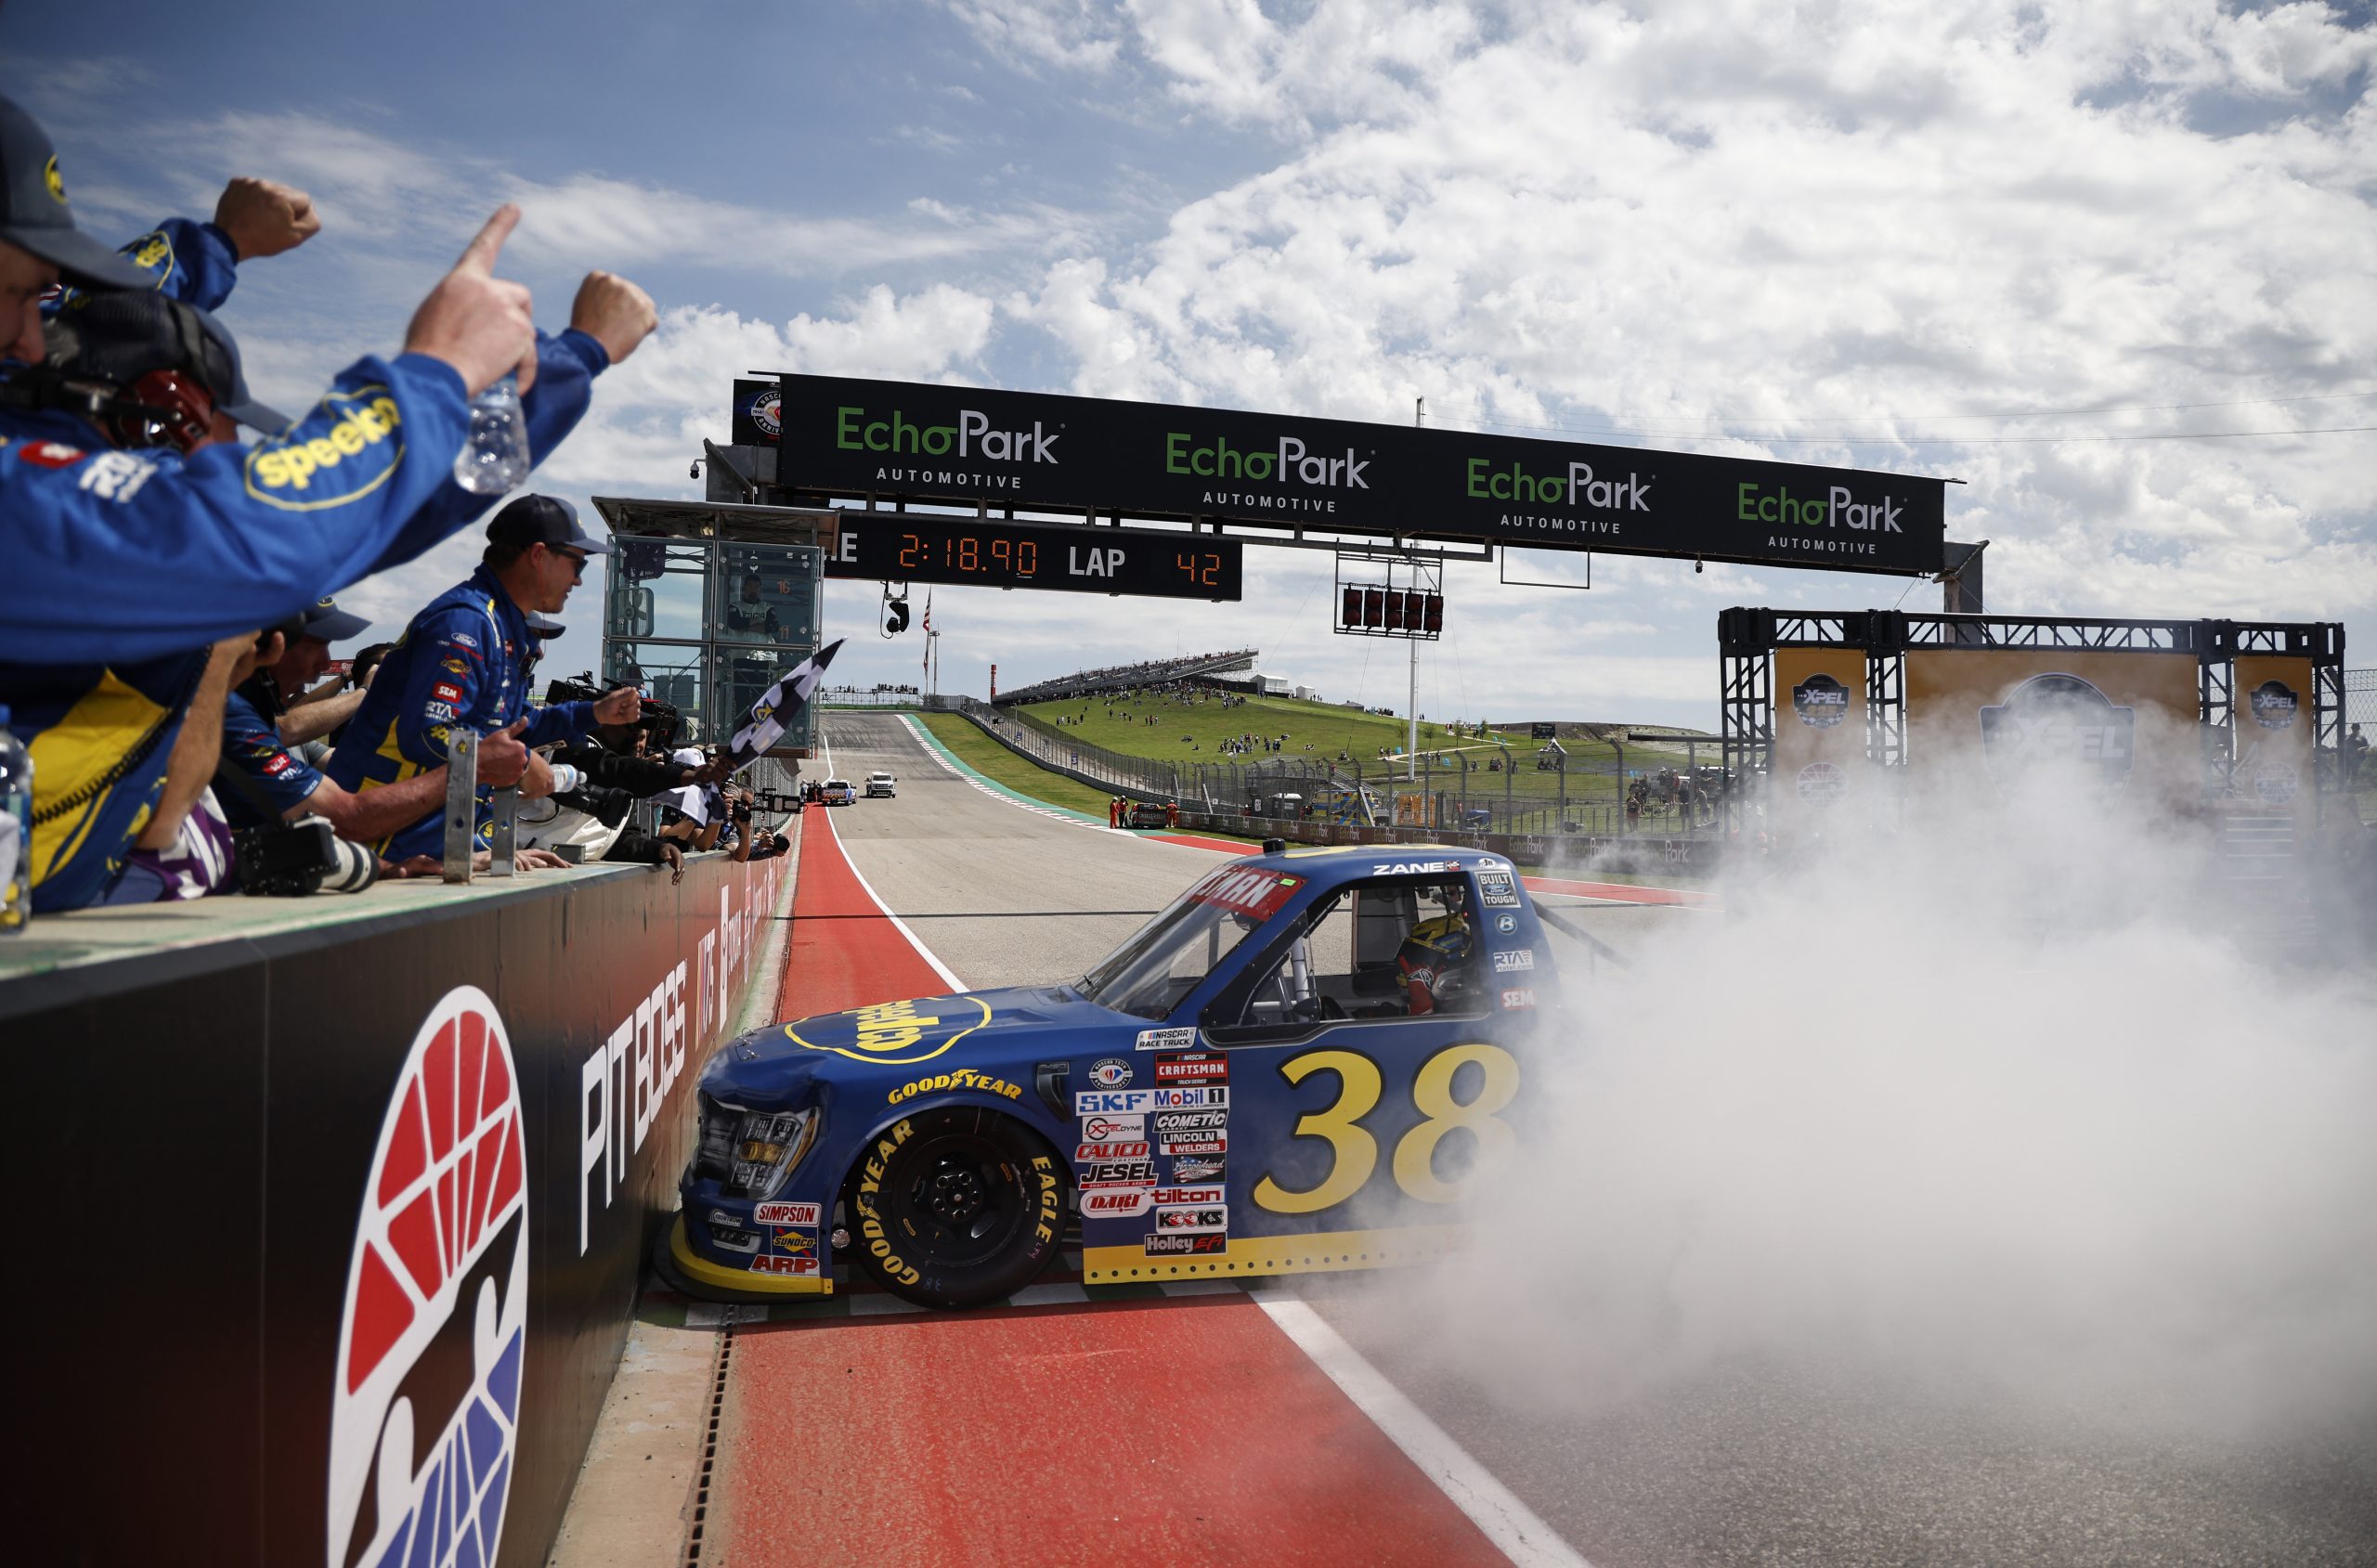 AUSTIN, TEXAS - MARCH 25: Zane Smith, driver of the #38 Speedco/Peak Ford, celebrates with a burnout after winning the NASCAR Craftsman Truck Series XPEL 225 at Circuit of The Americas on March 25, 2023 in Austin, Texas. (Photo by Chris Graythen/Getty Images)